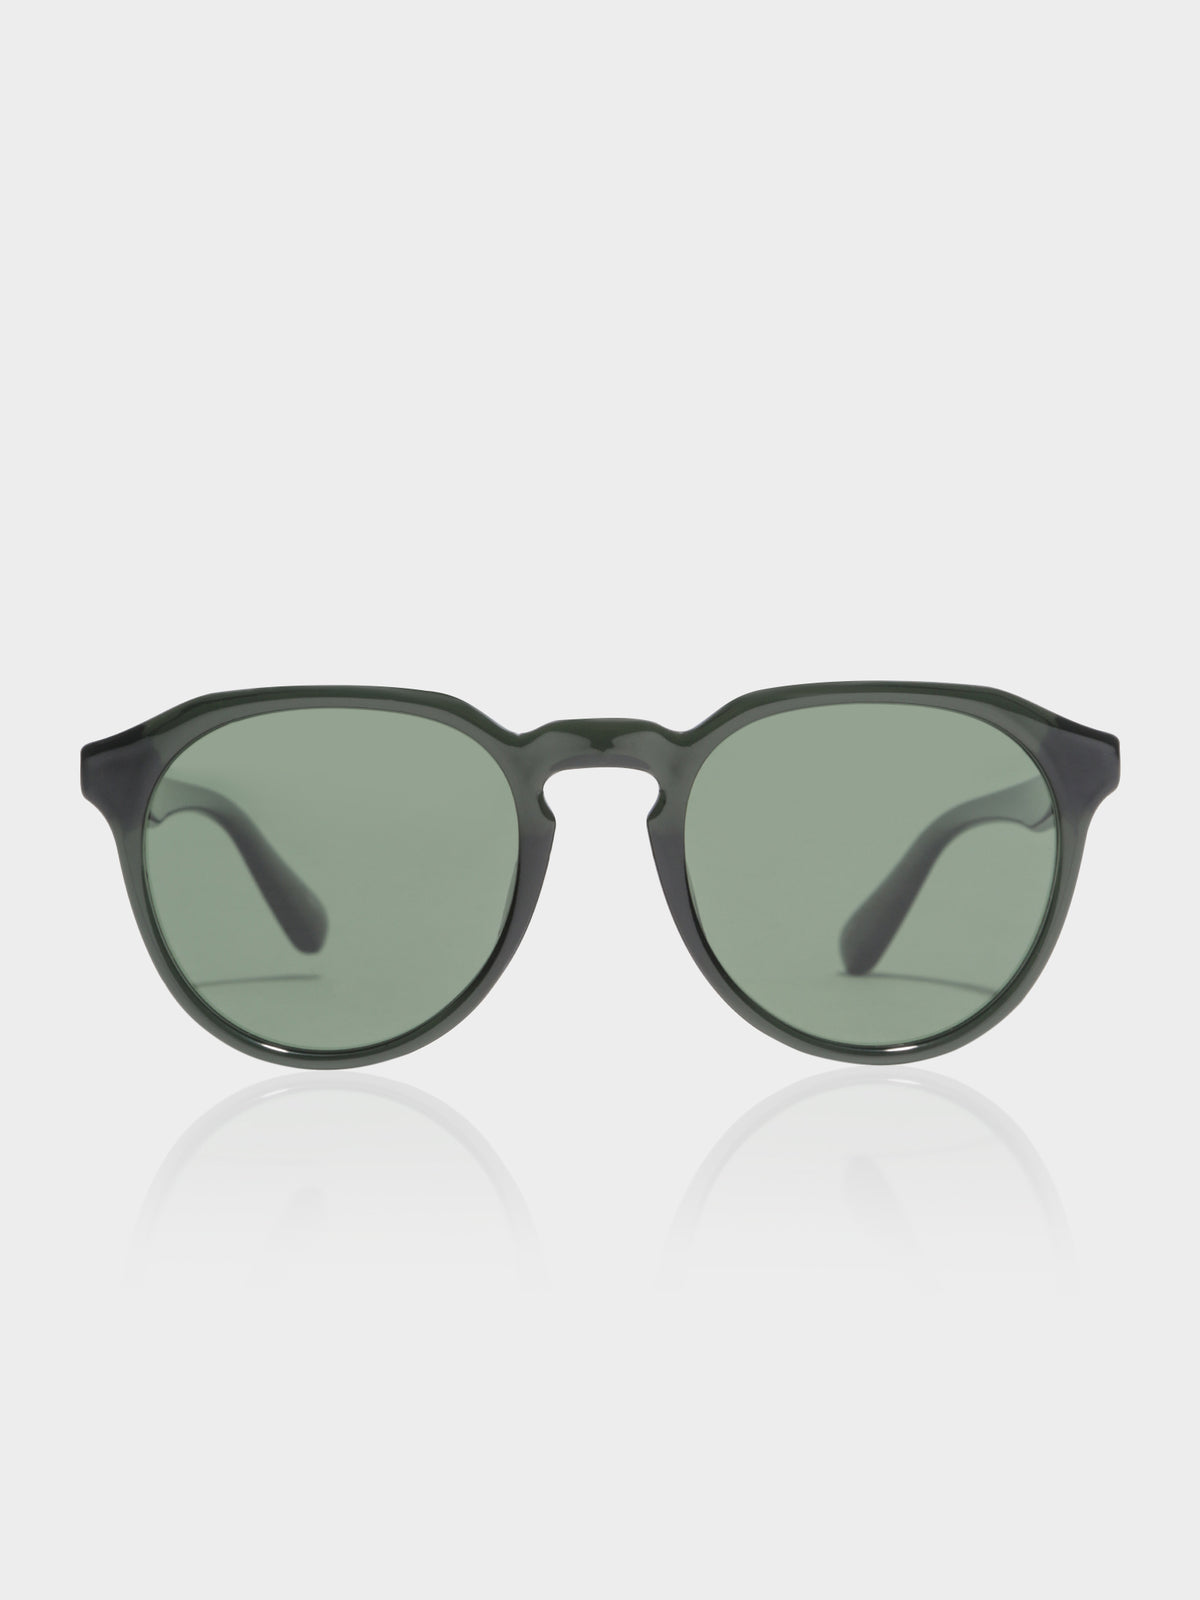 TYO Polarised Sunglasses in Polished Forest Green